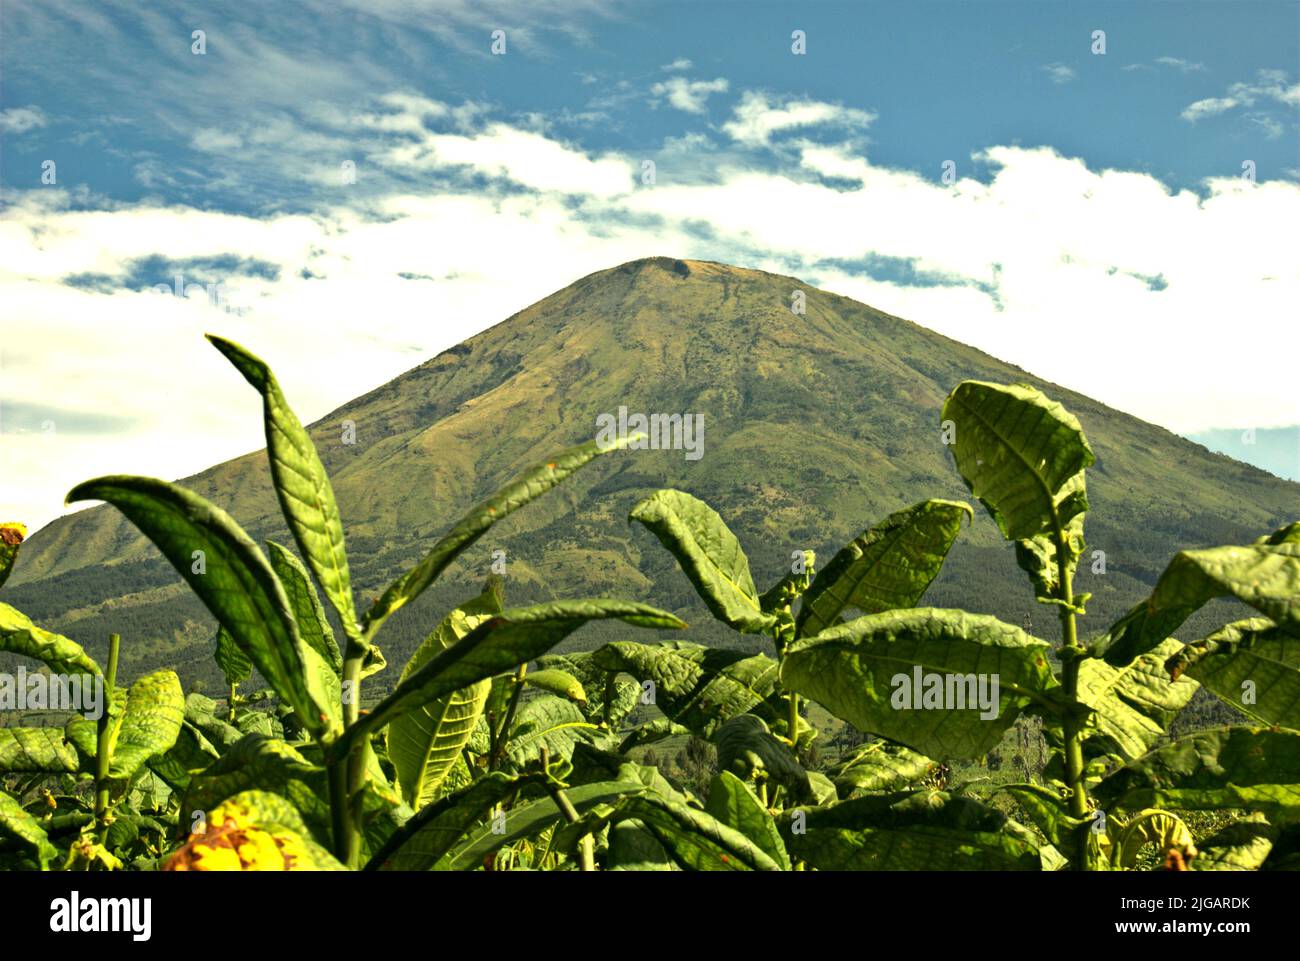 Tobacco plantation in a background of Mount Sundoro in Temanggung, Central Java, Indonesia. With 197.25 thousand metric tons, Indonesia has been ranked on the sixth place on the list of leading tobacco producing countries in 2019—below China, India, Brazil, Zimbabwe, and the US, according to Statista.  'Around six million people have been relying on tobacco for livelihood,' said Budidoyo, head of AMTI (Indonesia's tobacco society alliance), as quoted by CNBC Indonesia on on June 10, 2021. Stock Photo